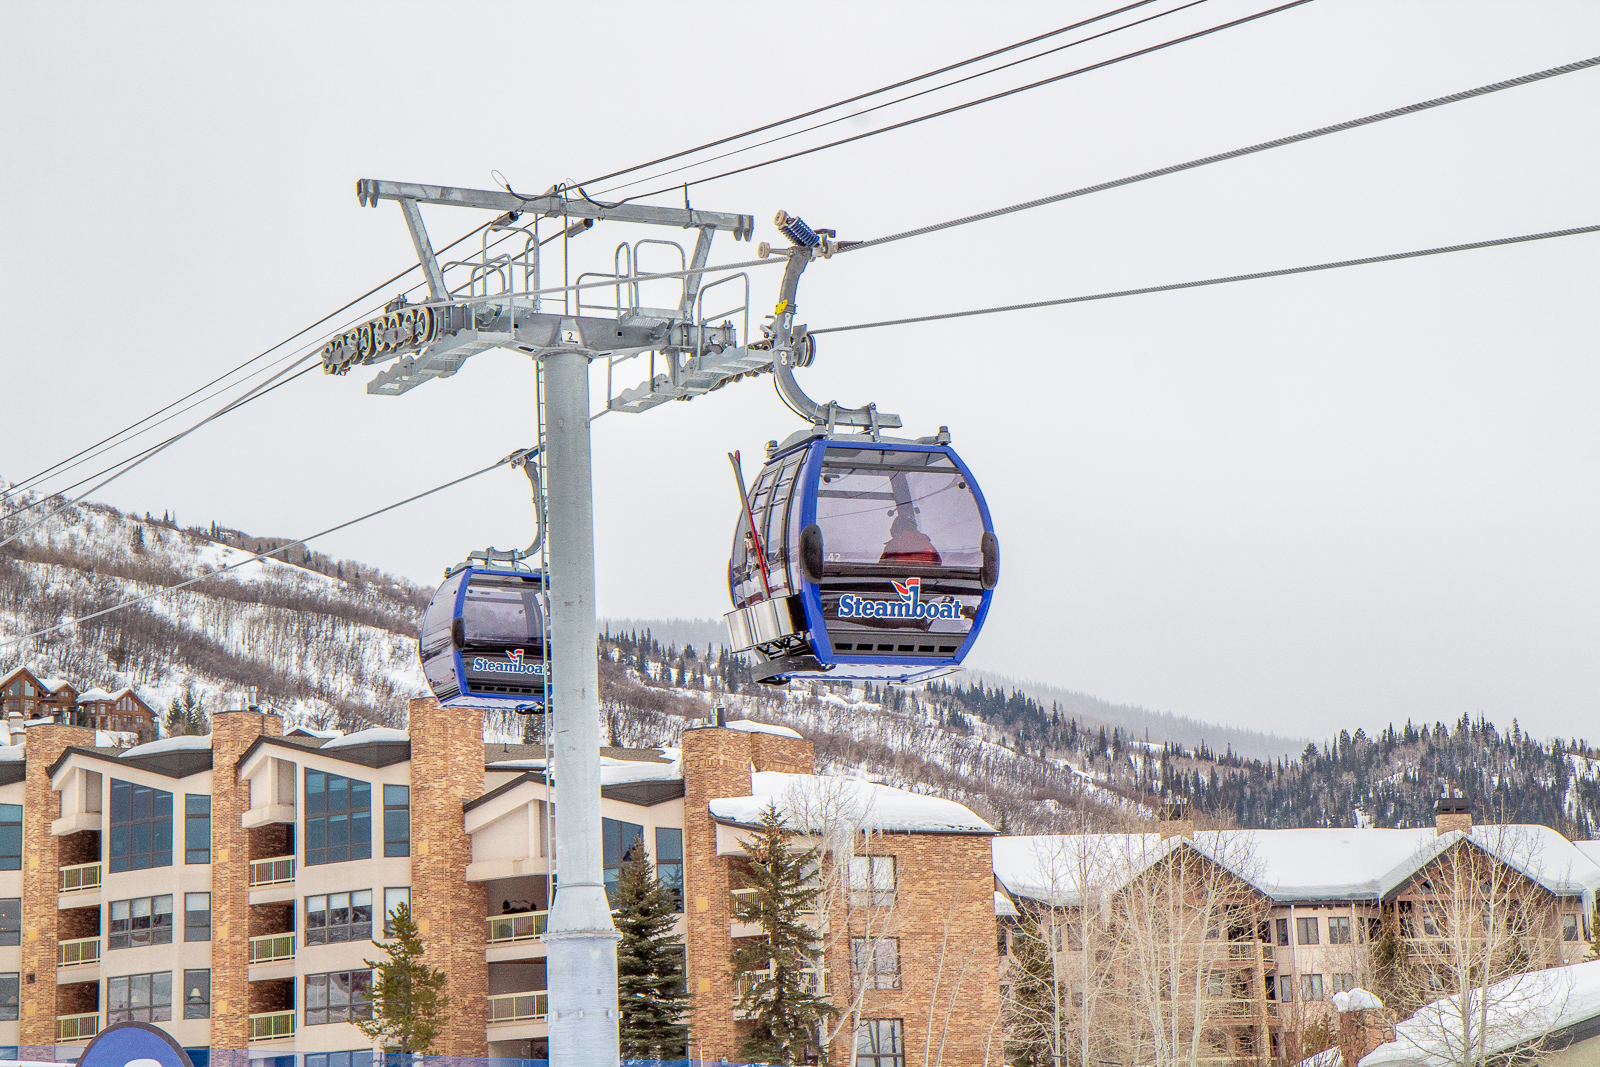 Things to do besides ski in Steamboat Springs, CO